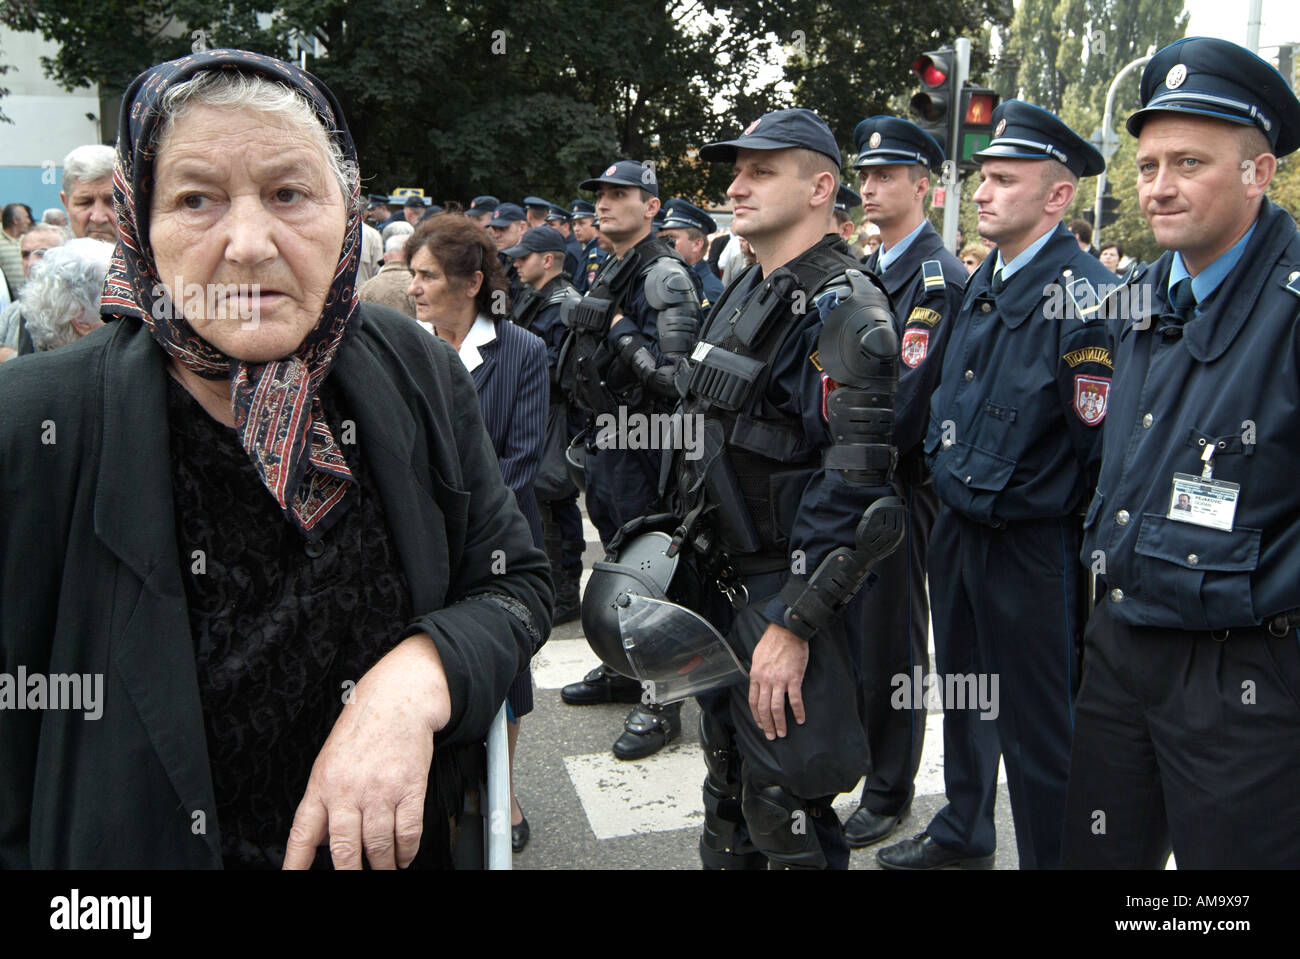 Pensioners Protesting Against Planned Cuts in Pension Payments. Bosnia Herzegovina. Stock Photo